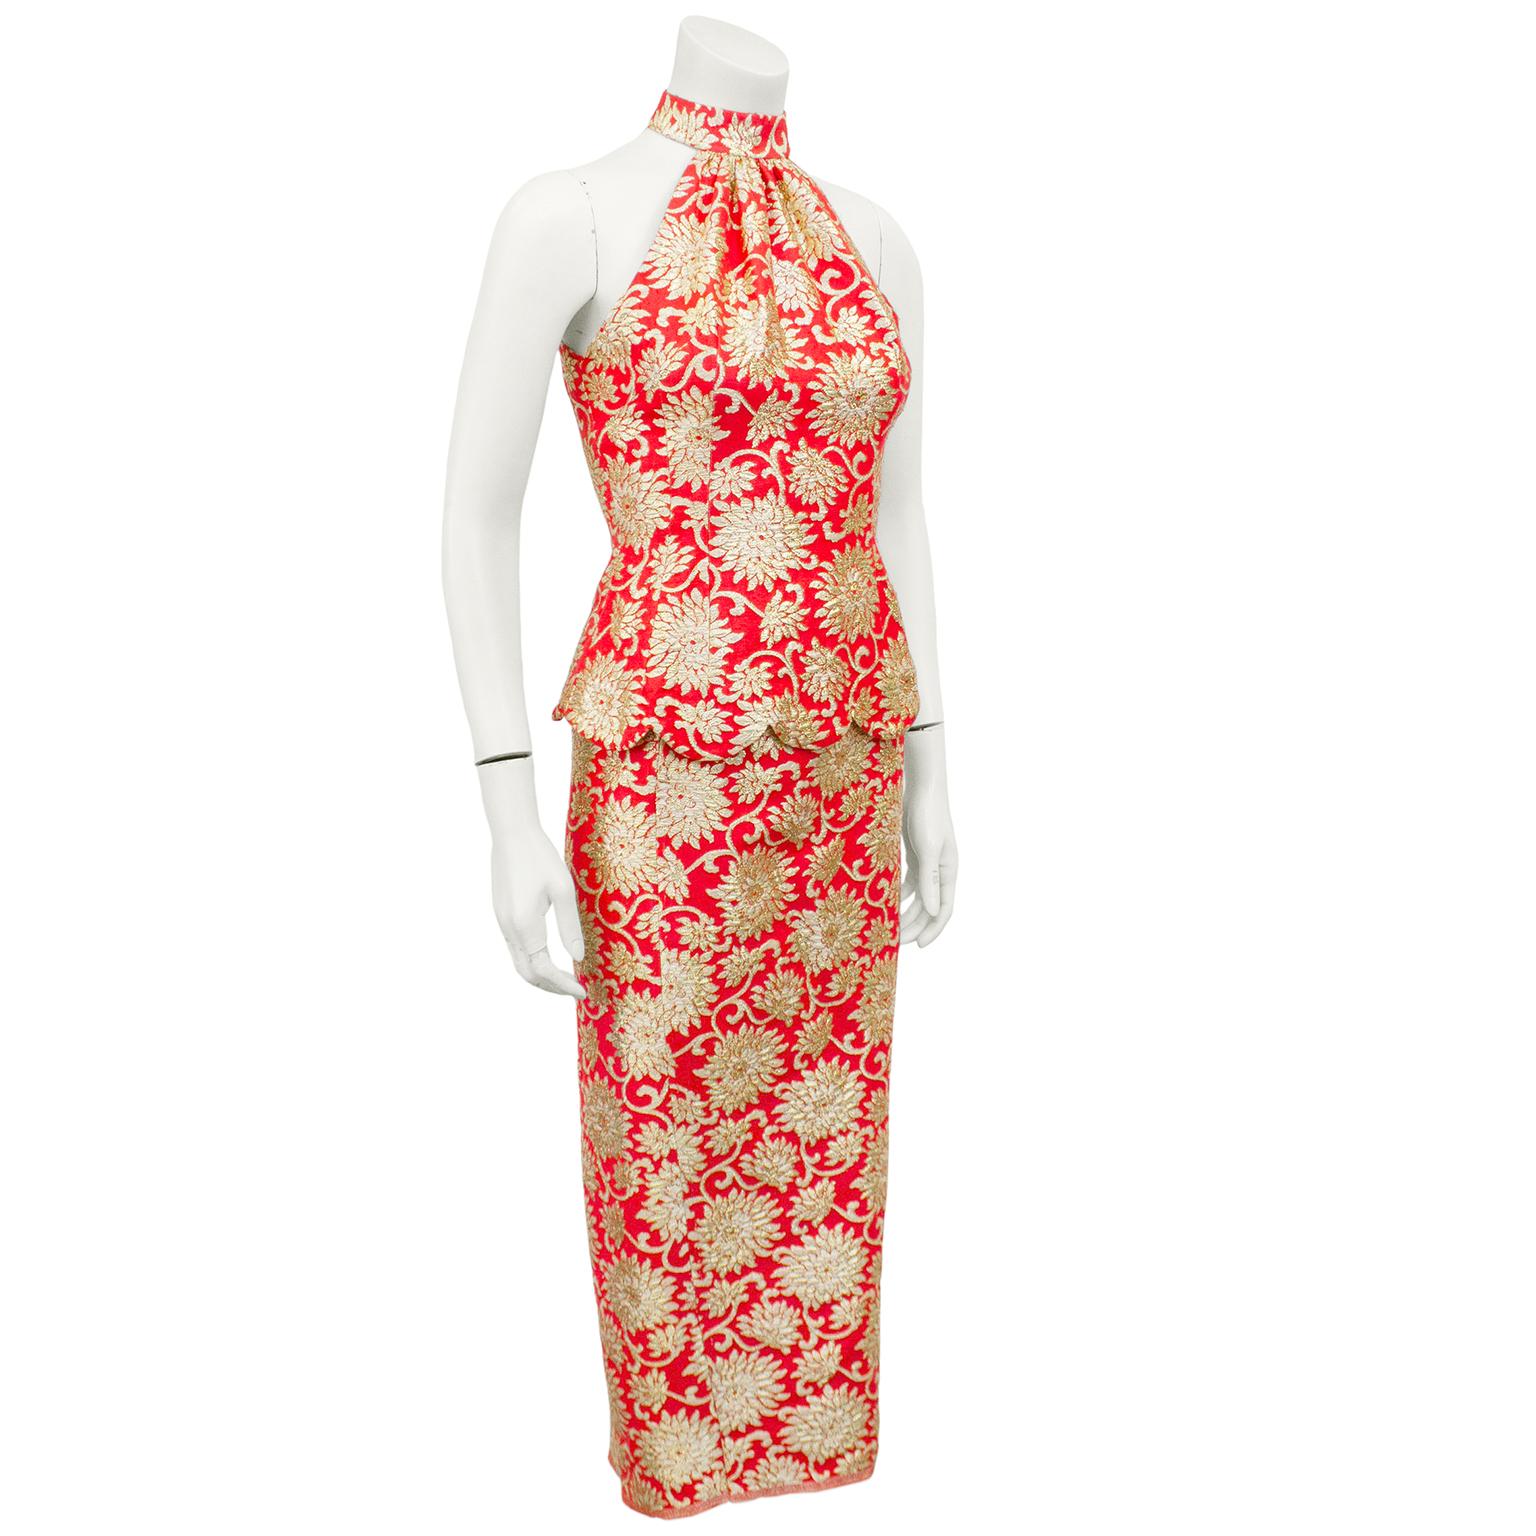 1960's bright coral and gold floral brocade top and skirt ensemble by Hawaiian designer Carla Dupréé. Fitted top features a halter neckline, scalloped hem and fabric covered button closures up centre back. Skirt is high waisted, pencil style, midi